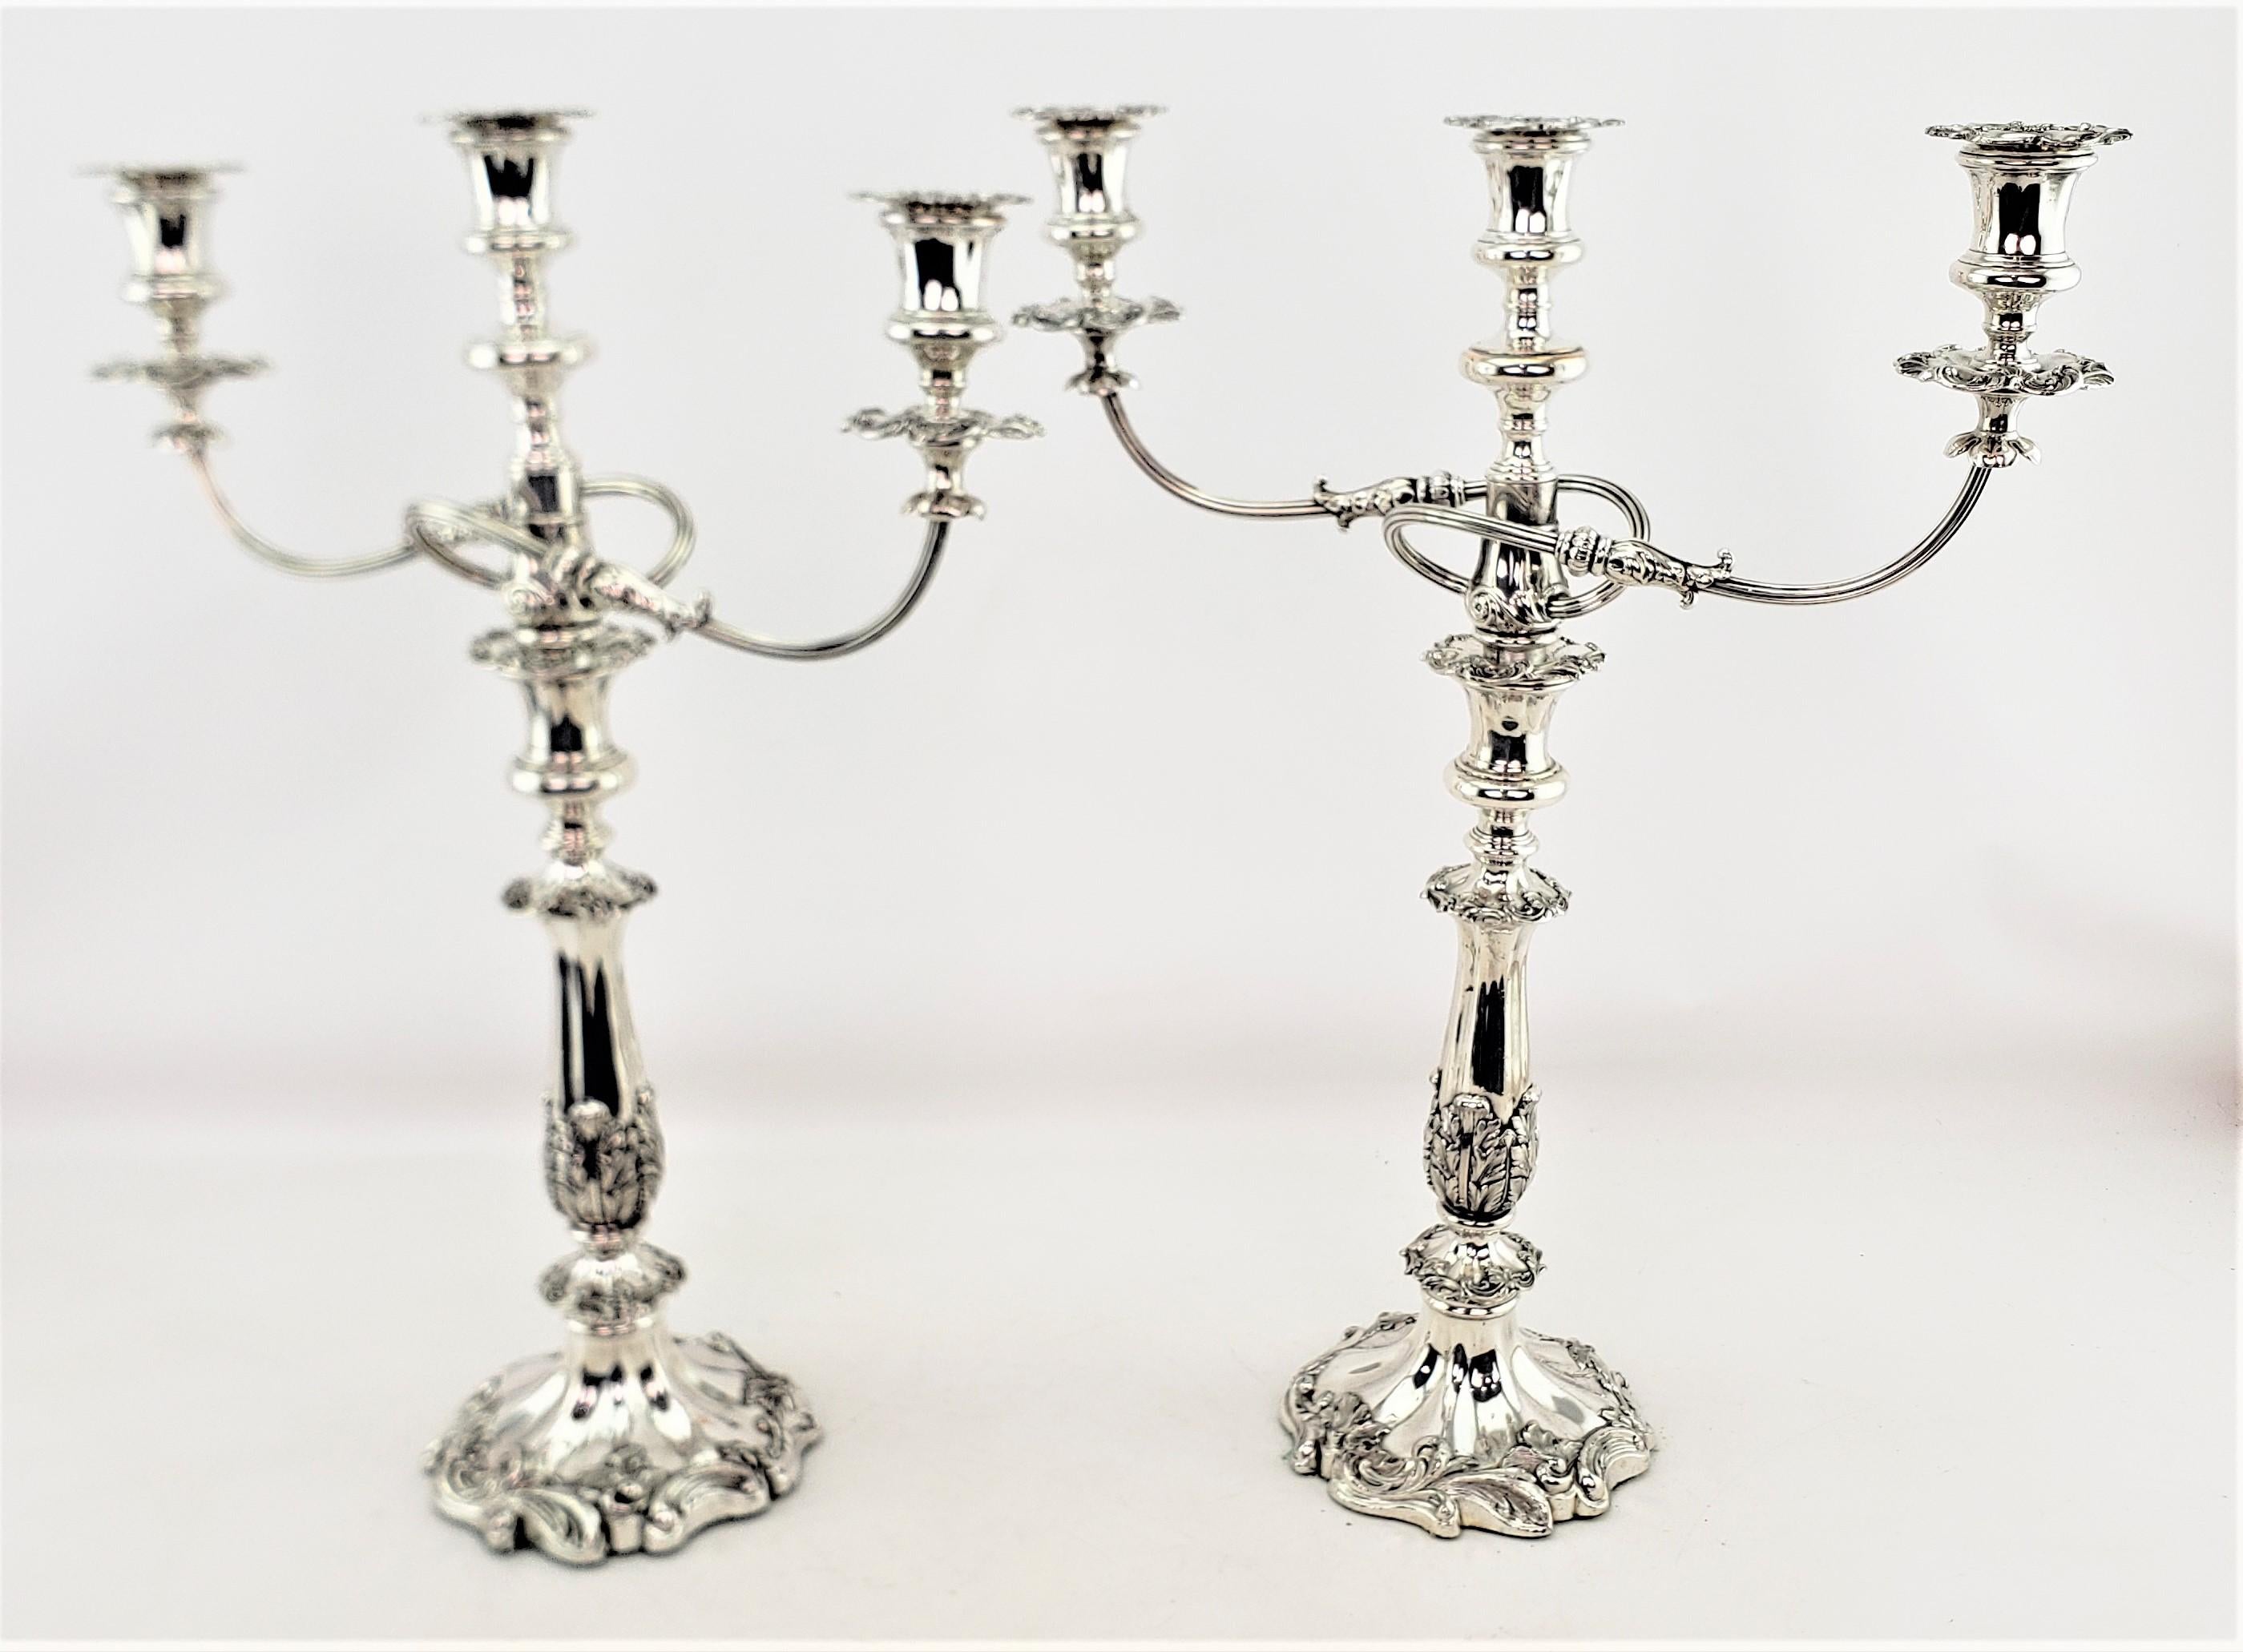 English Antique Silver Plated Convertible Candelabras or Candlesticks with Leaf Decor For Sale